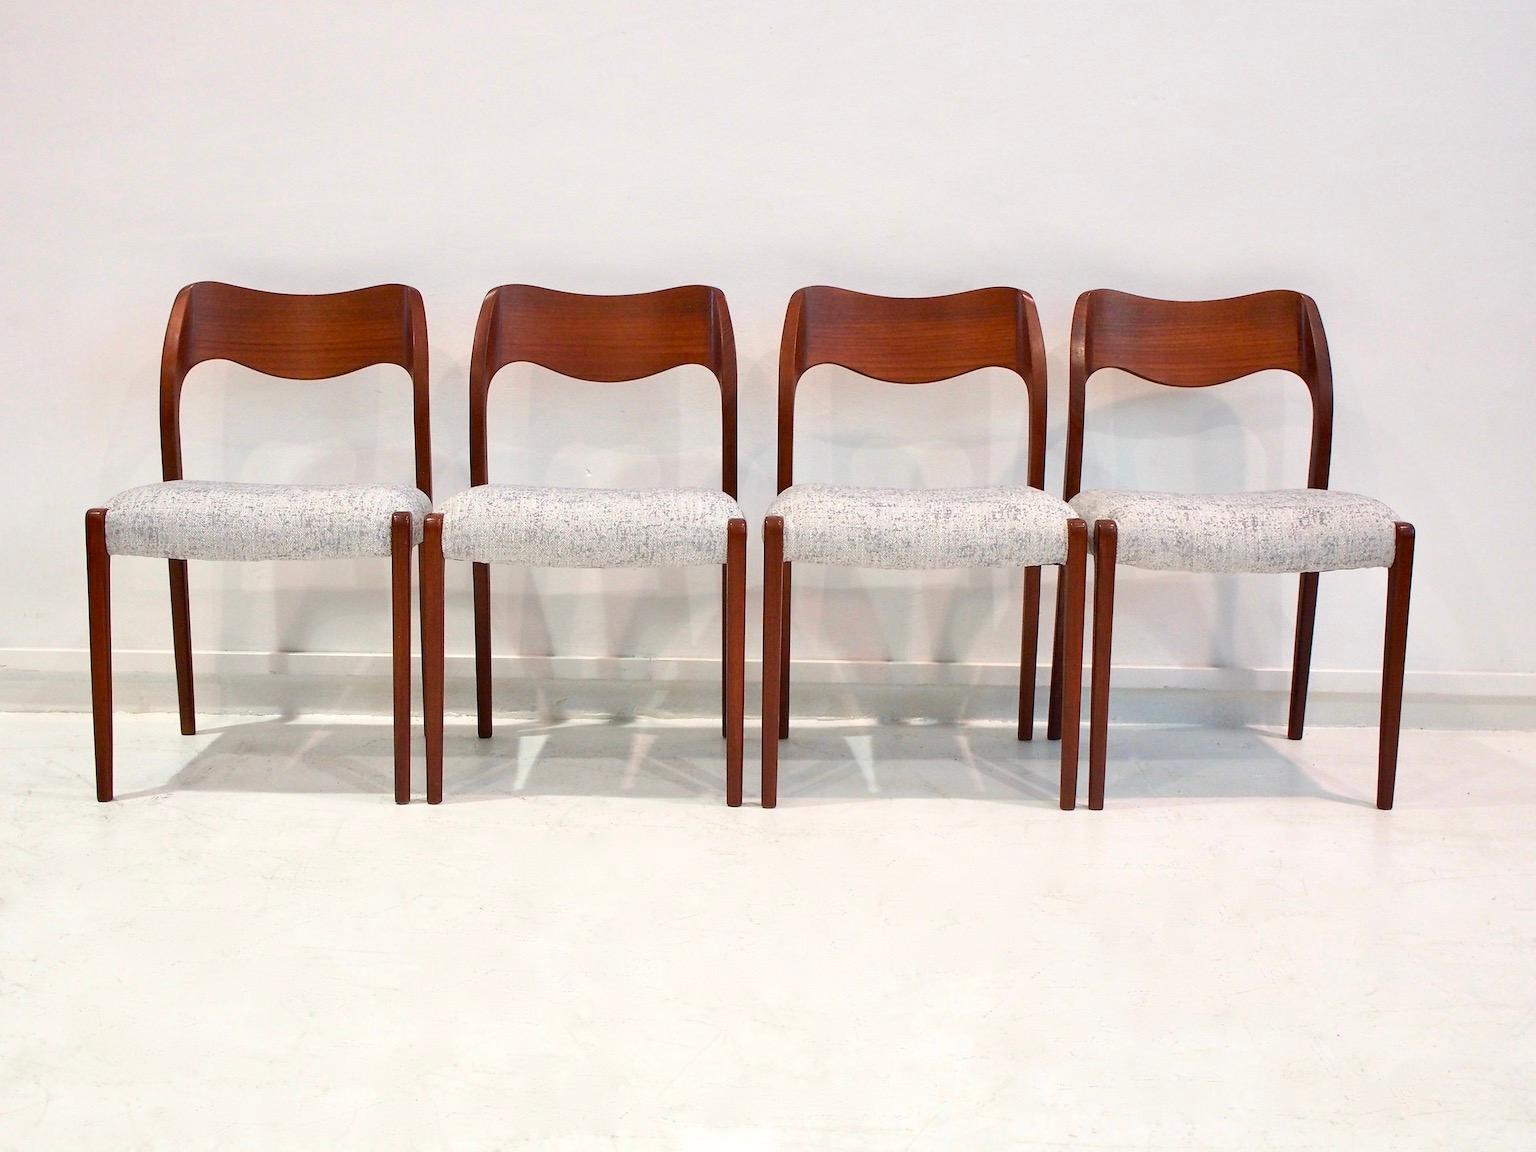 Danish solid teak dining chairs, model 71, by Niels Otto Møller for J. L. Møllers Møbelfabrik. Designed in 1951. Recently restored and reupholstered in light grey fabric.